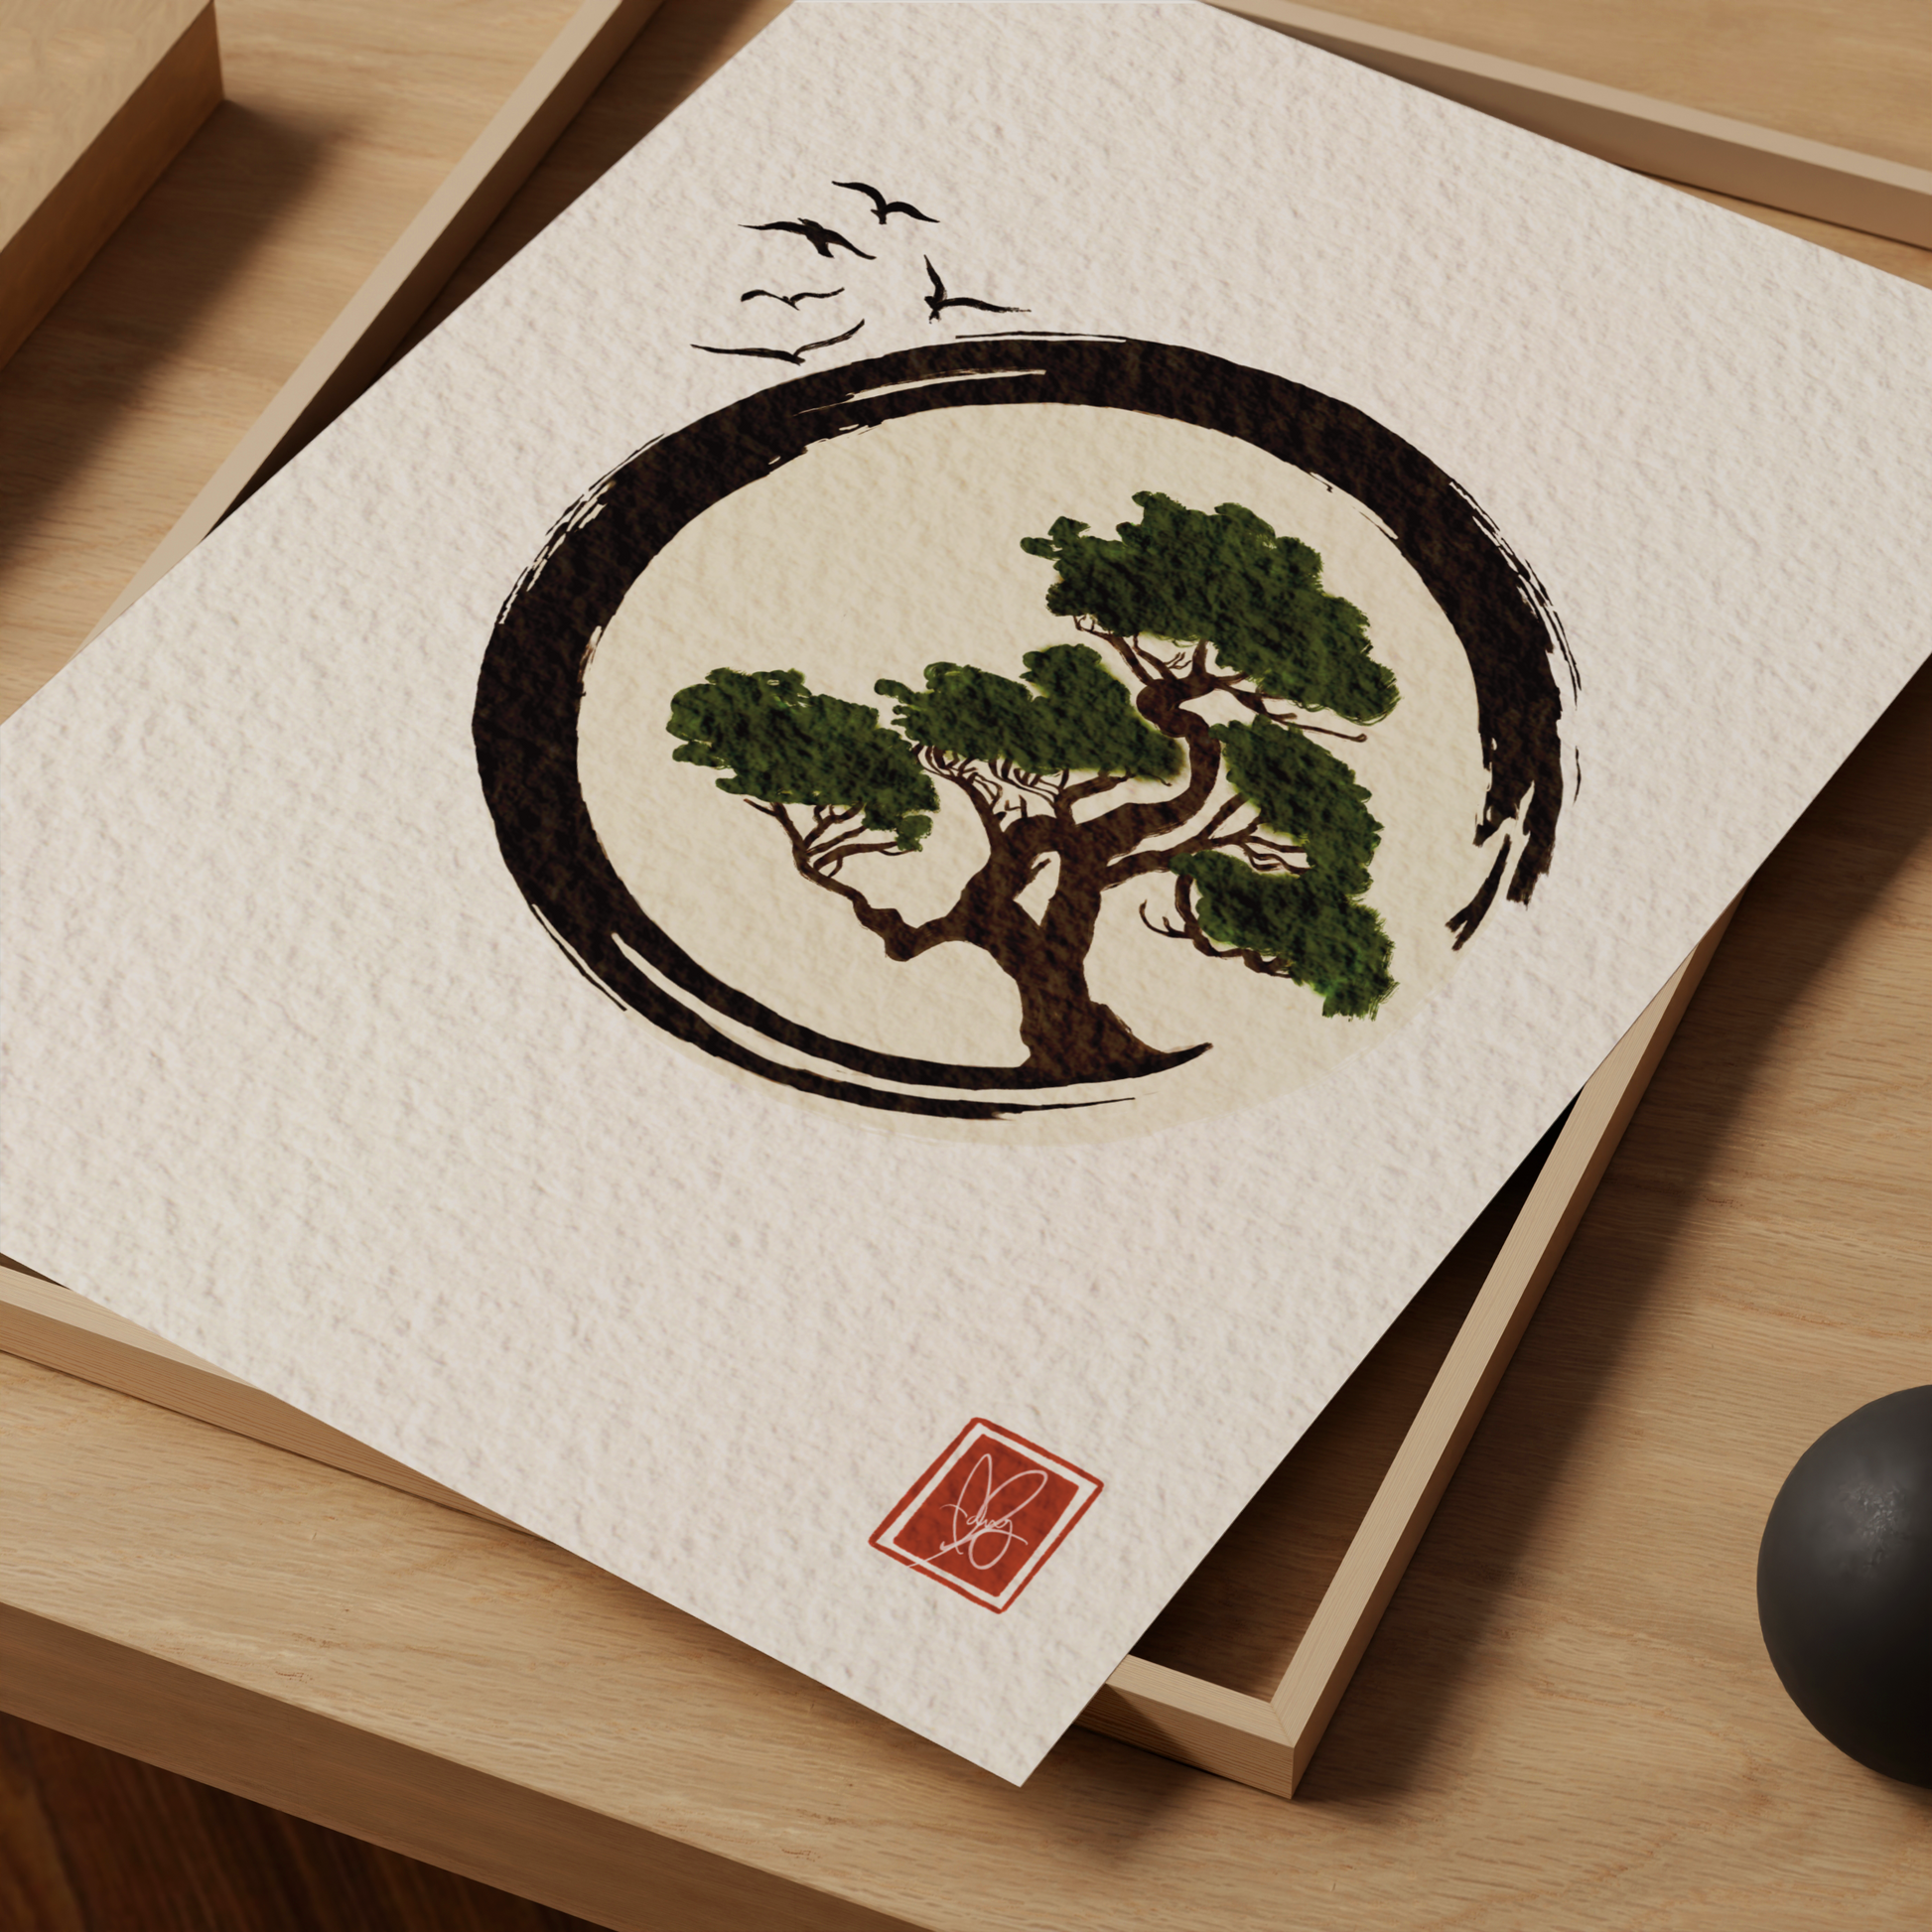 Japandi-Inspired Bonsai Tree Digital Print by Unwrapped Collections - Oriental Home Decor Artwork.